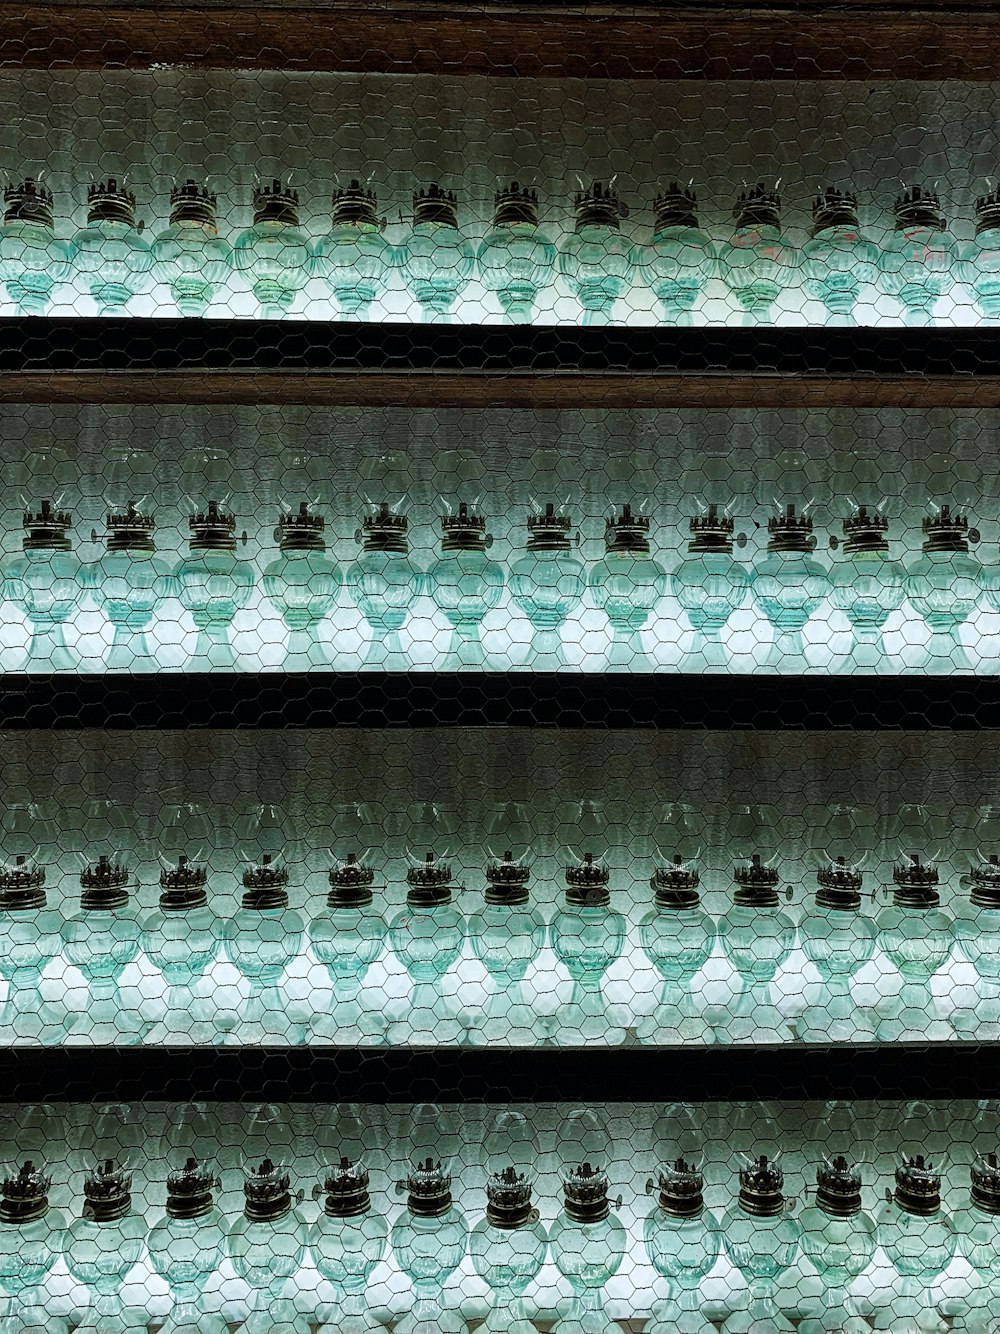 rows of glass bottles are lined up on a shelf